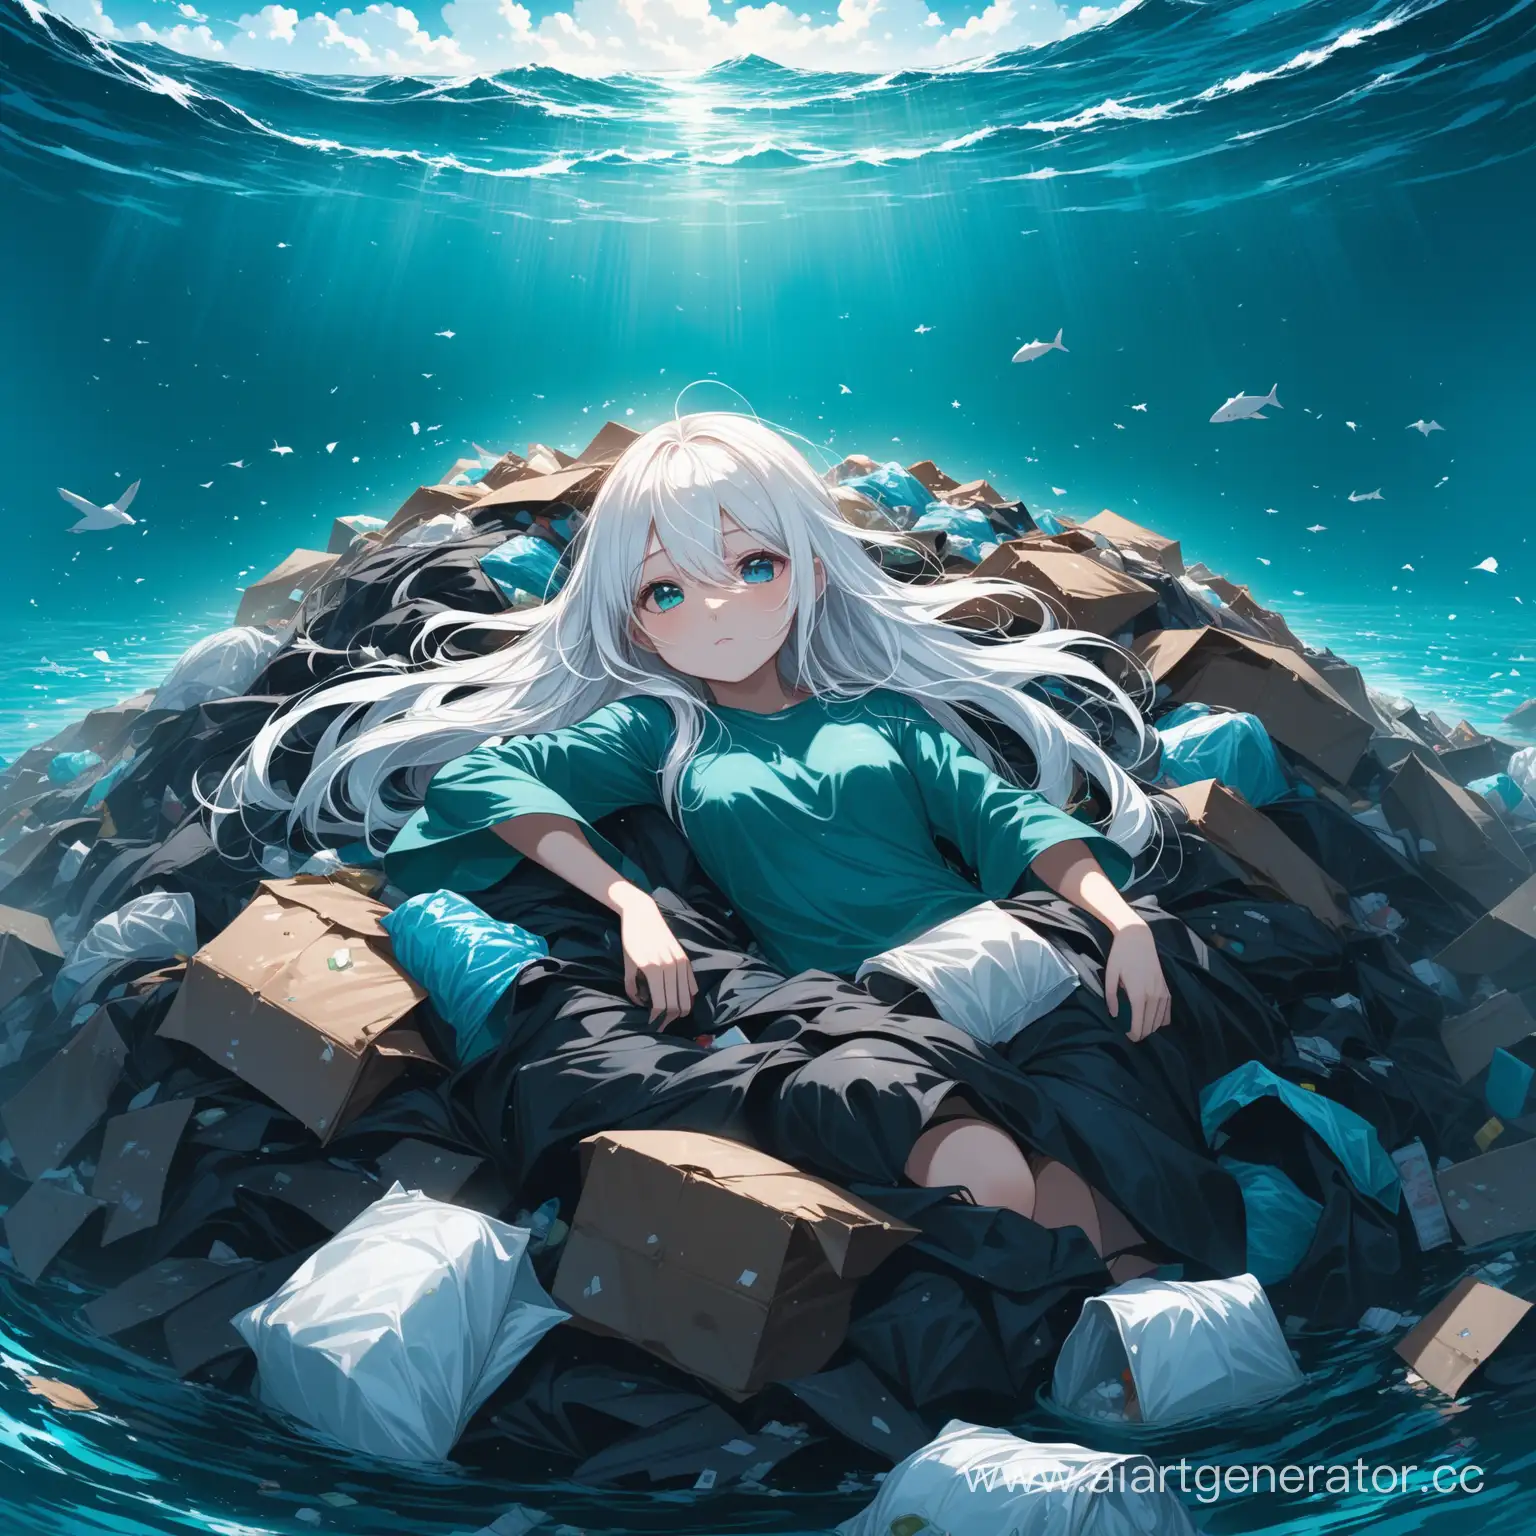 dark art, dark turquoise water around a pile of garbage, the character of a girl with long white hair lying in a pile of garbage, dark blue sky